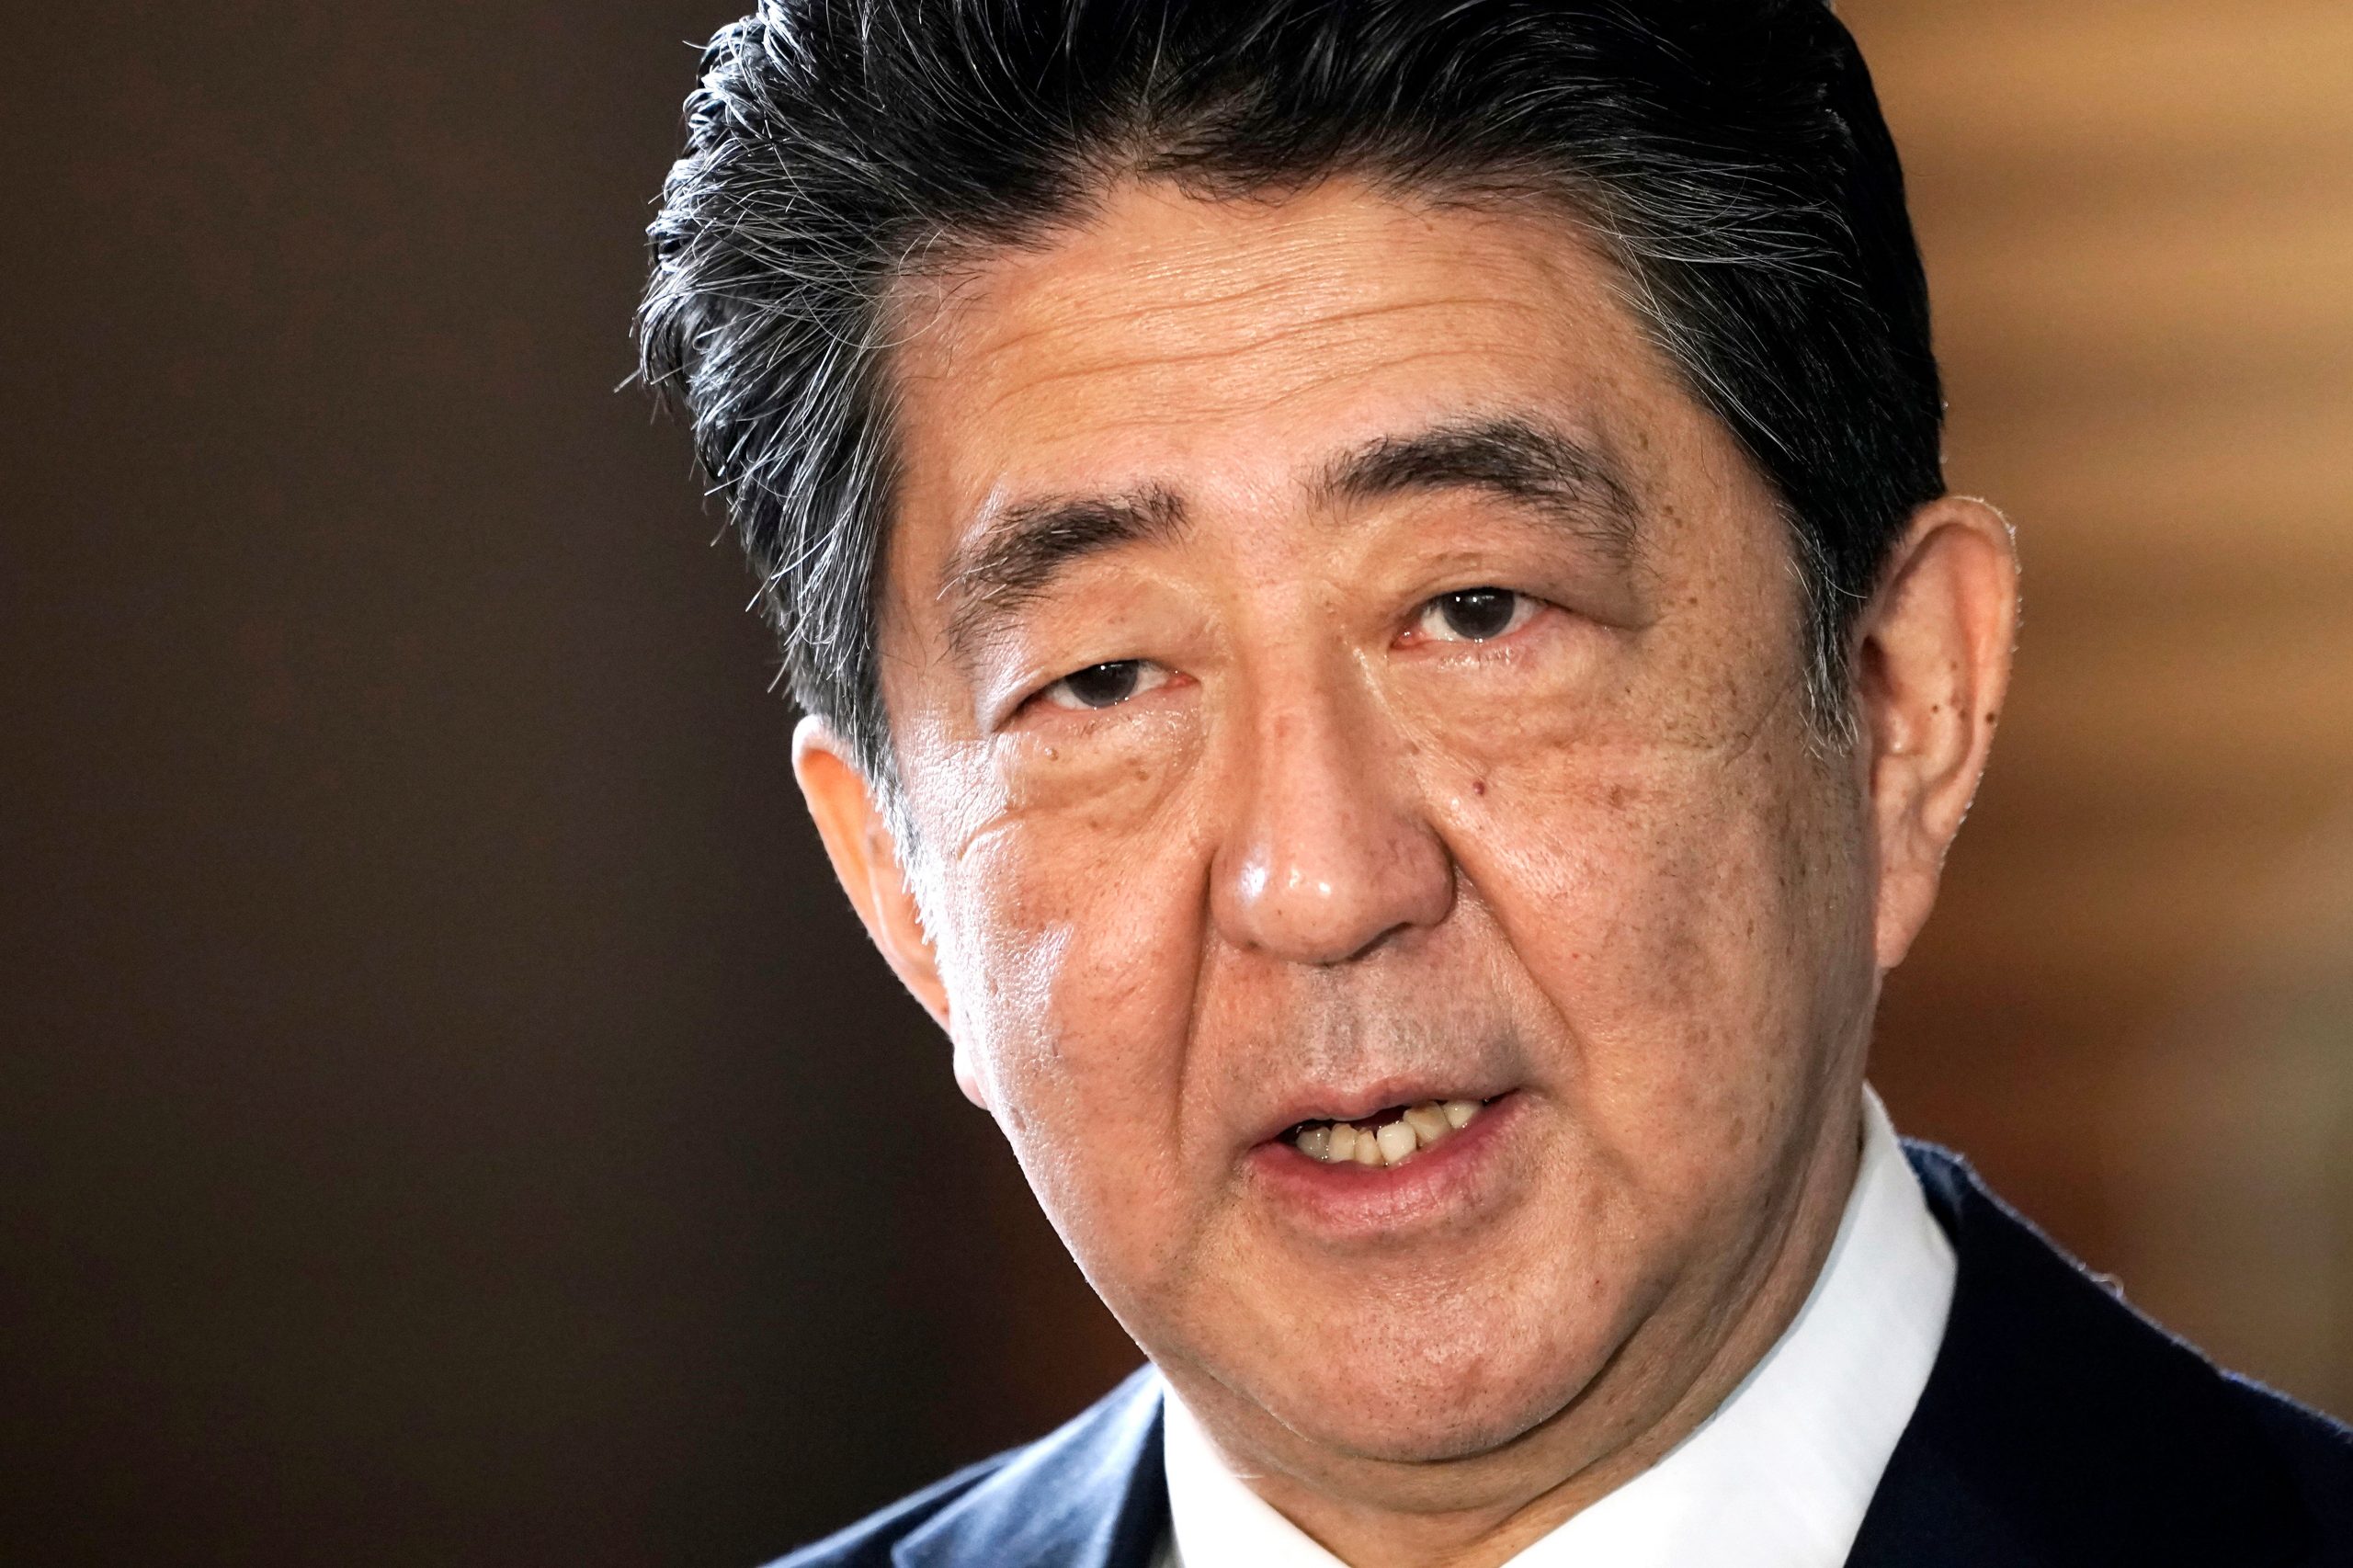 What is cardiopulmonary arrest, cause of ex-Japanese PM Shinzo Abe’s death?